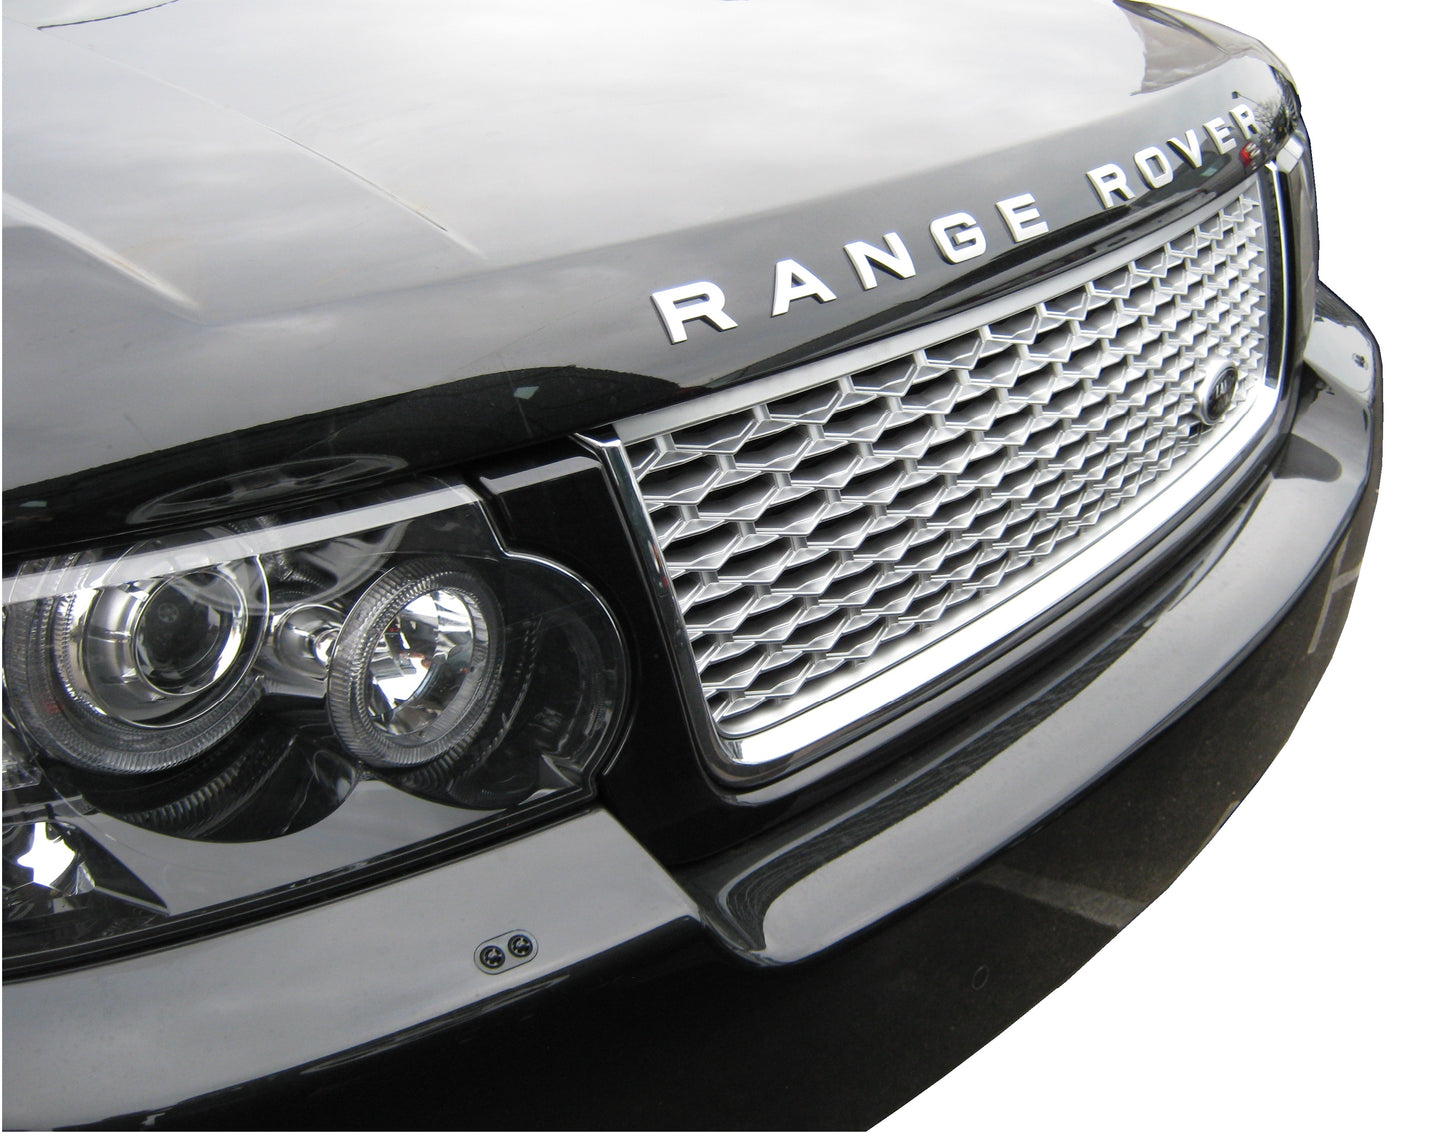 Front Grille - Black/Chrome/Silver for Range Rover L322 Autobiography